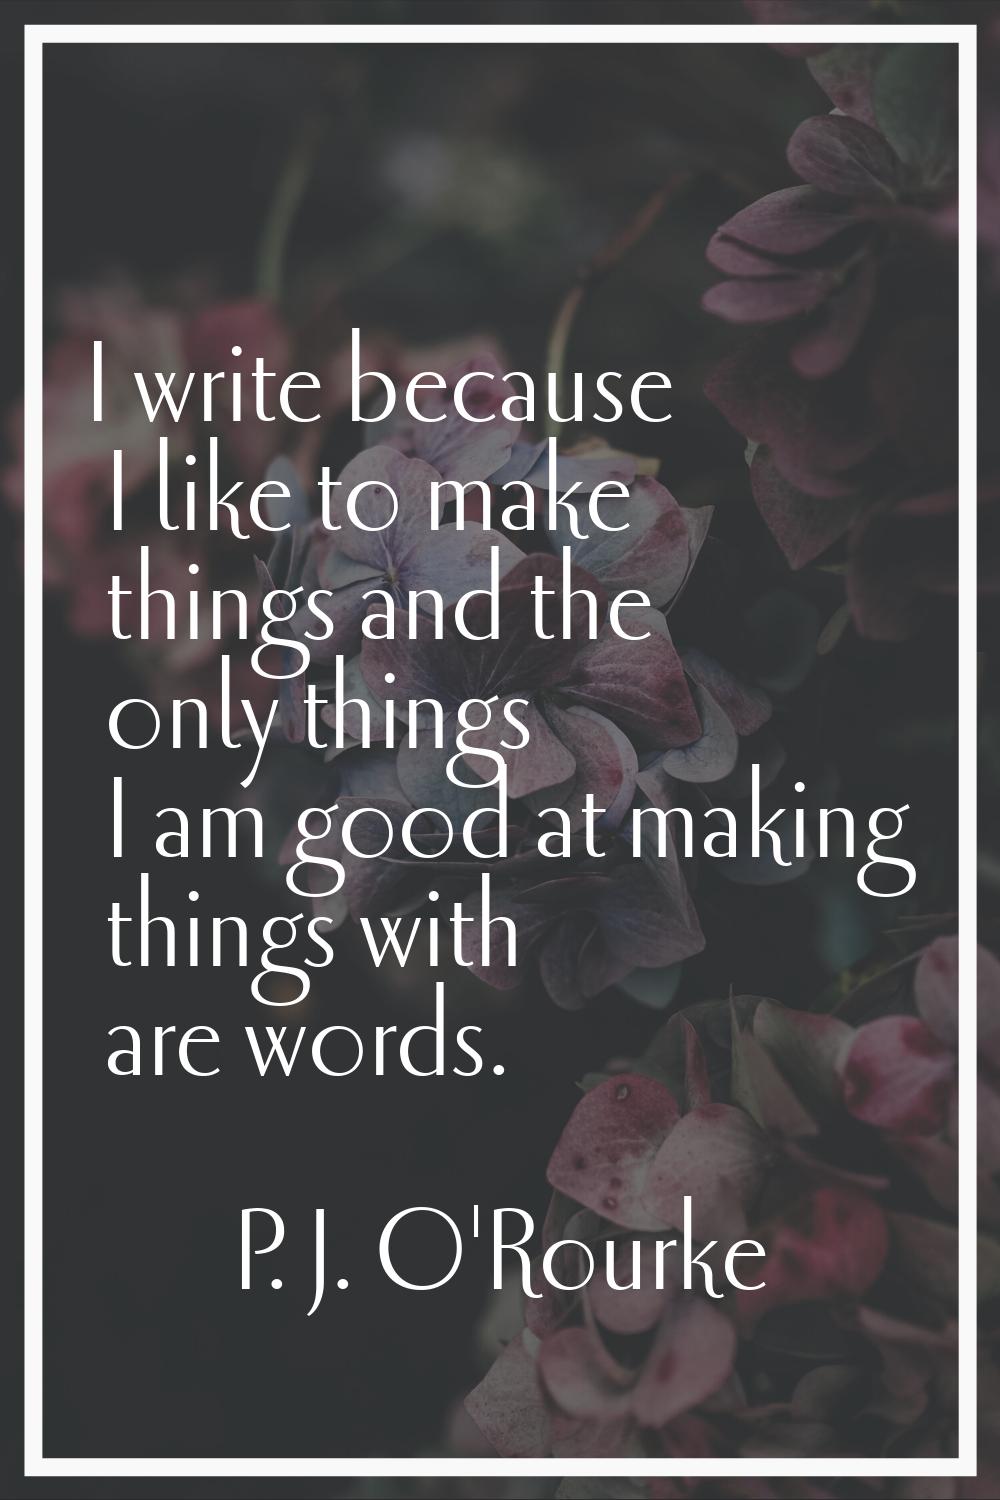 I write because I like to make things and the only things I am good at making things with are words